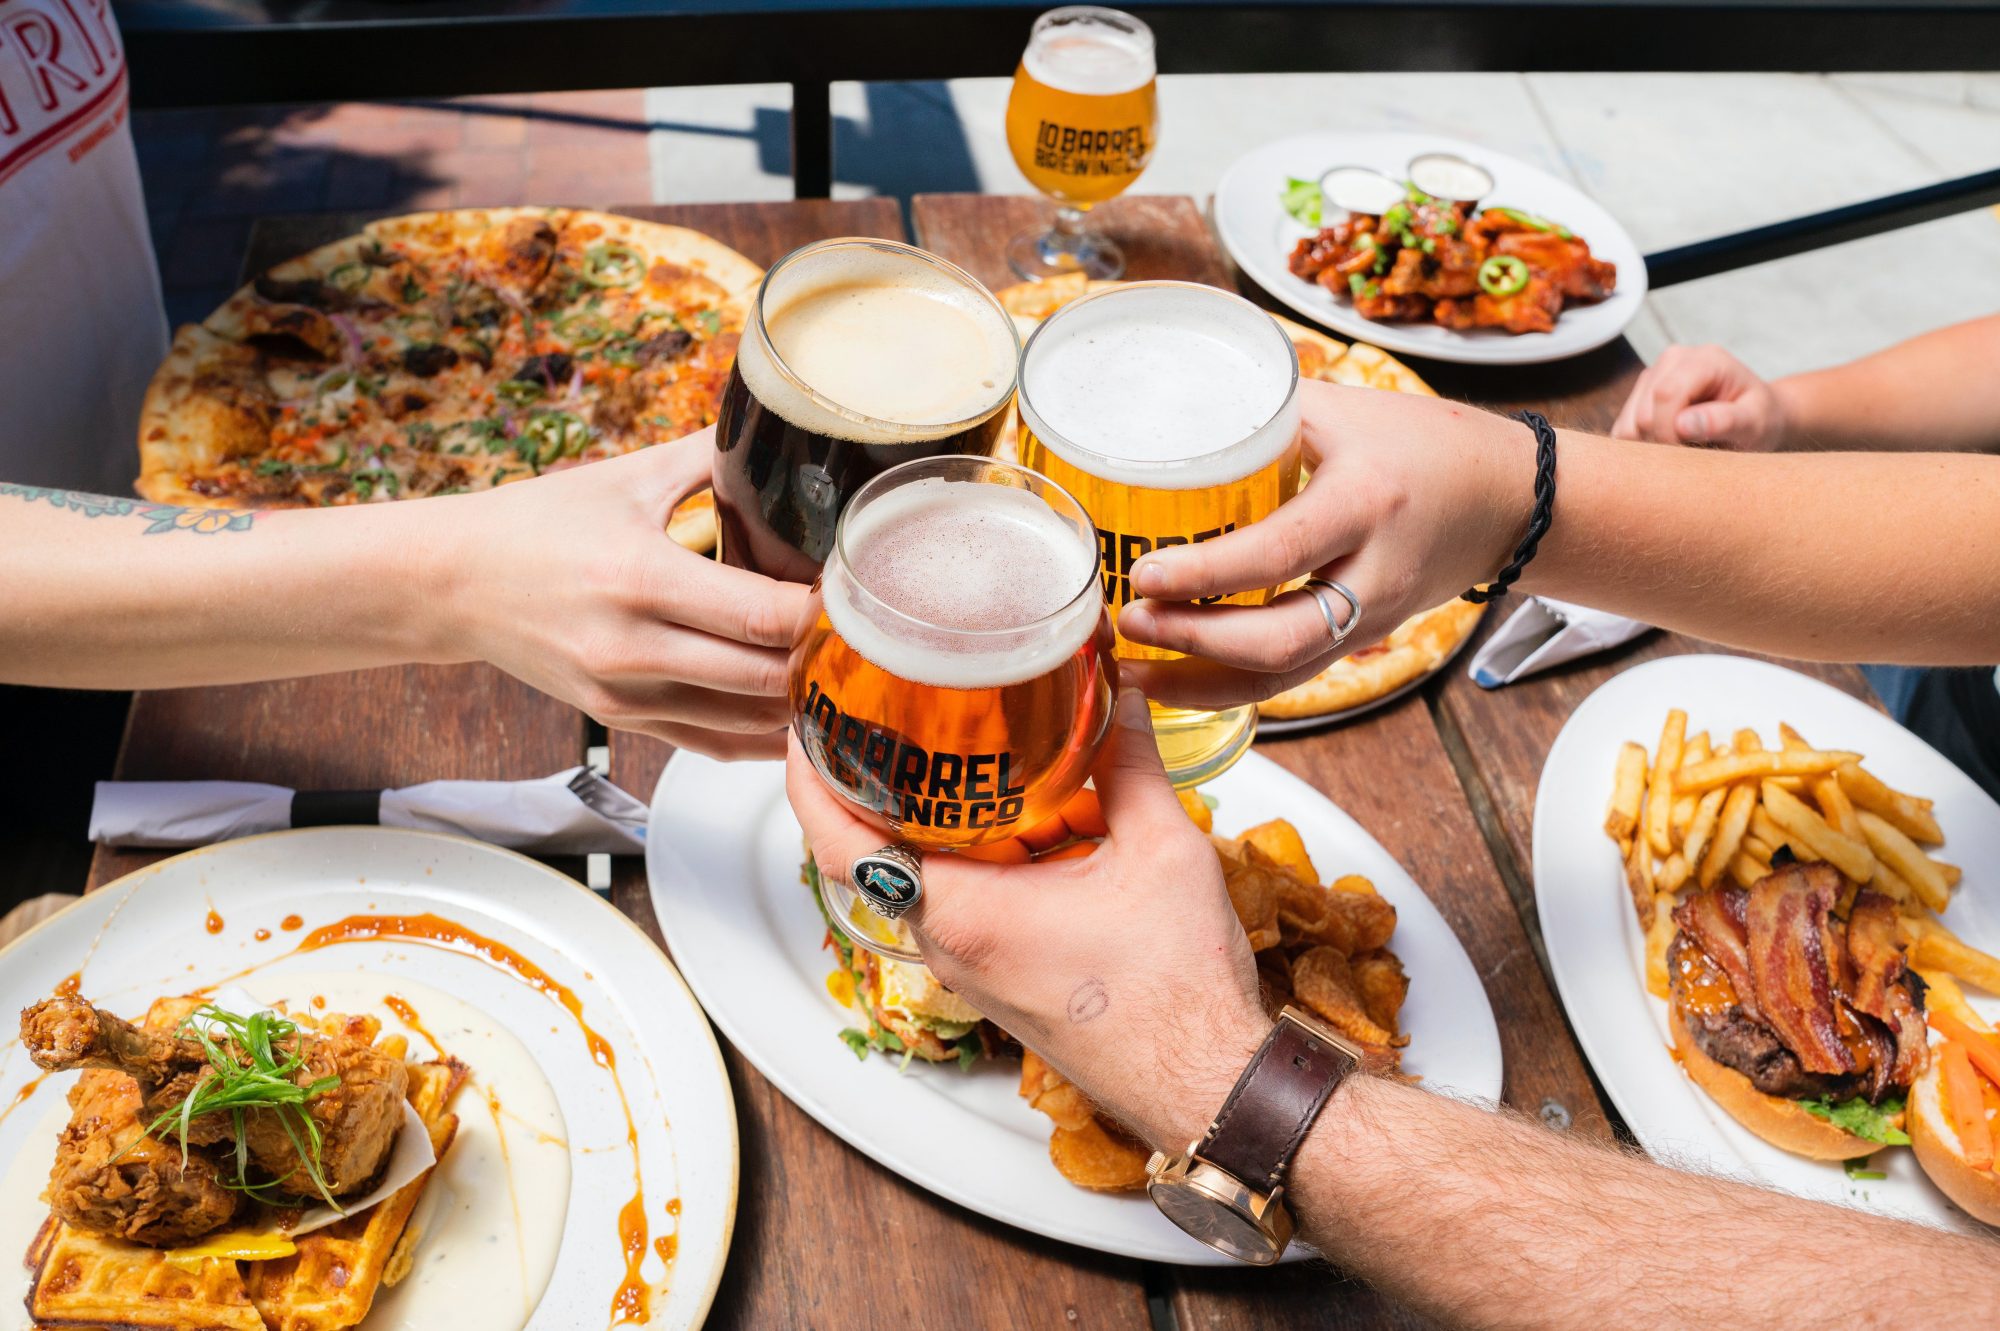 say "cheers" after work with your coworkers